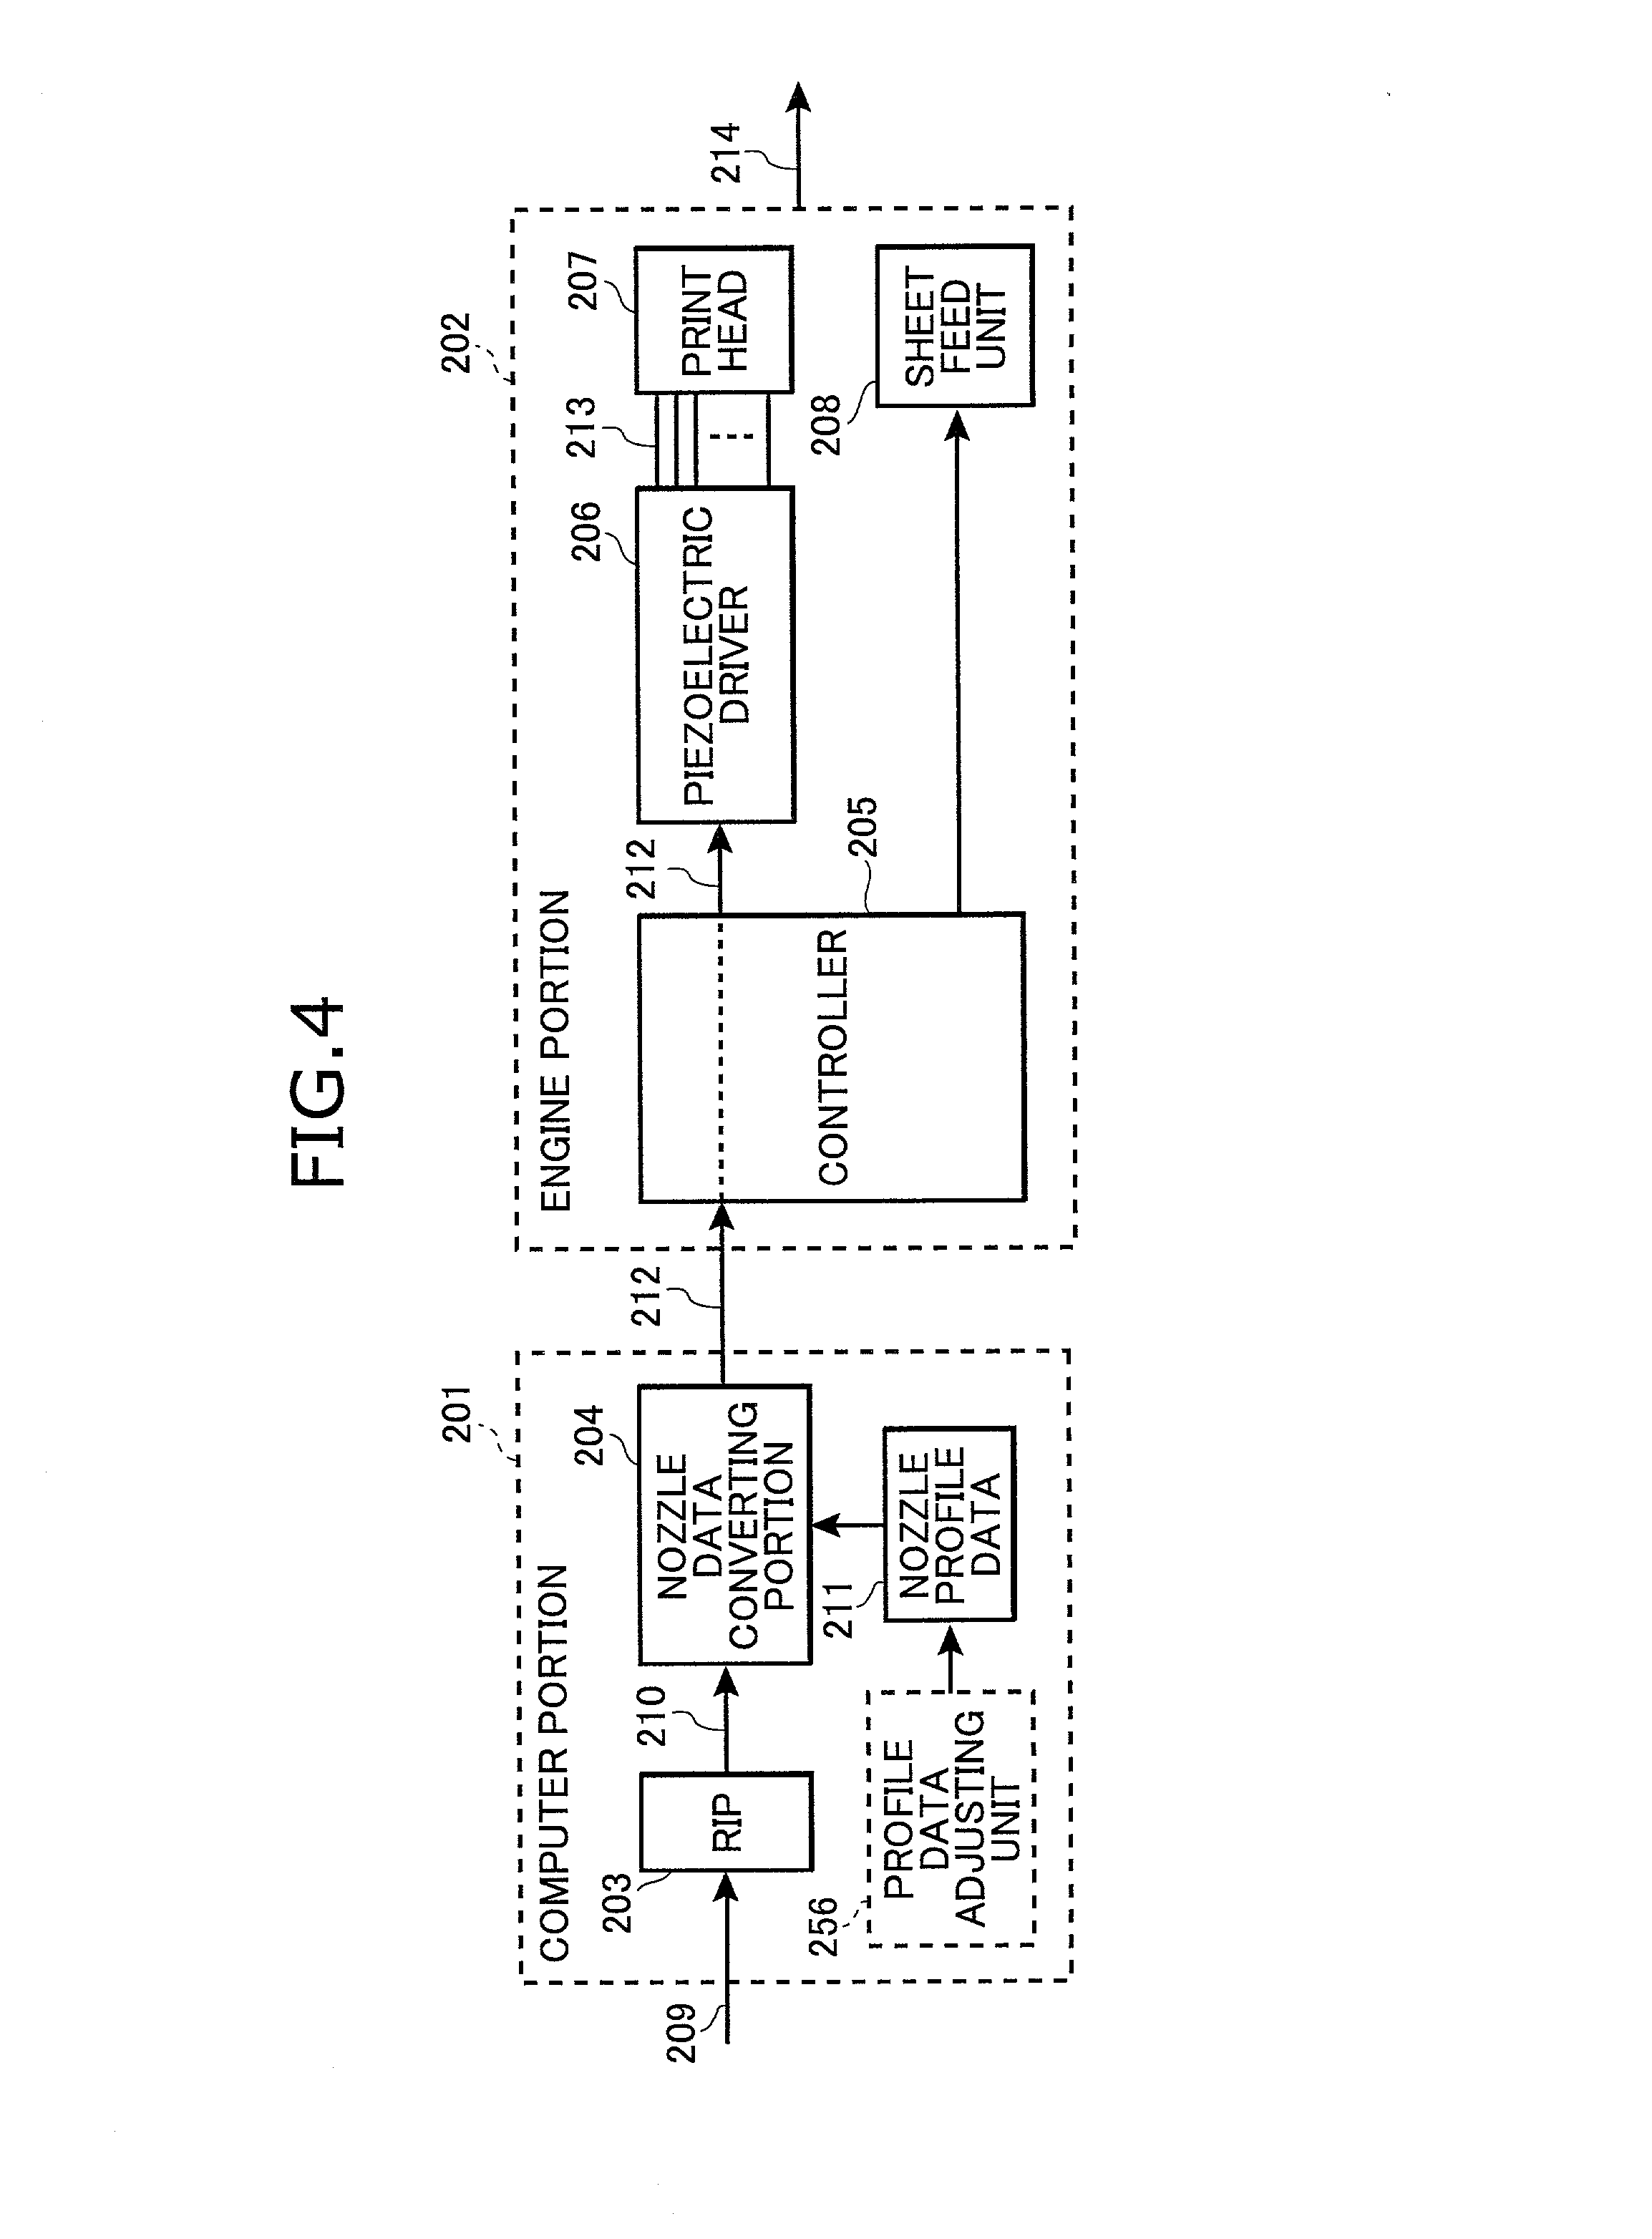 Line scanning type ink jet recording device capable of finely and individually controlling ink ejection from each nozzle